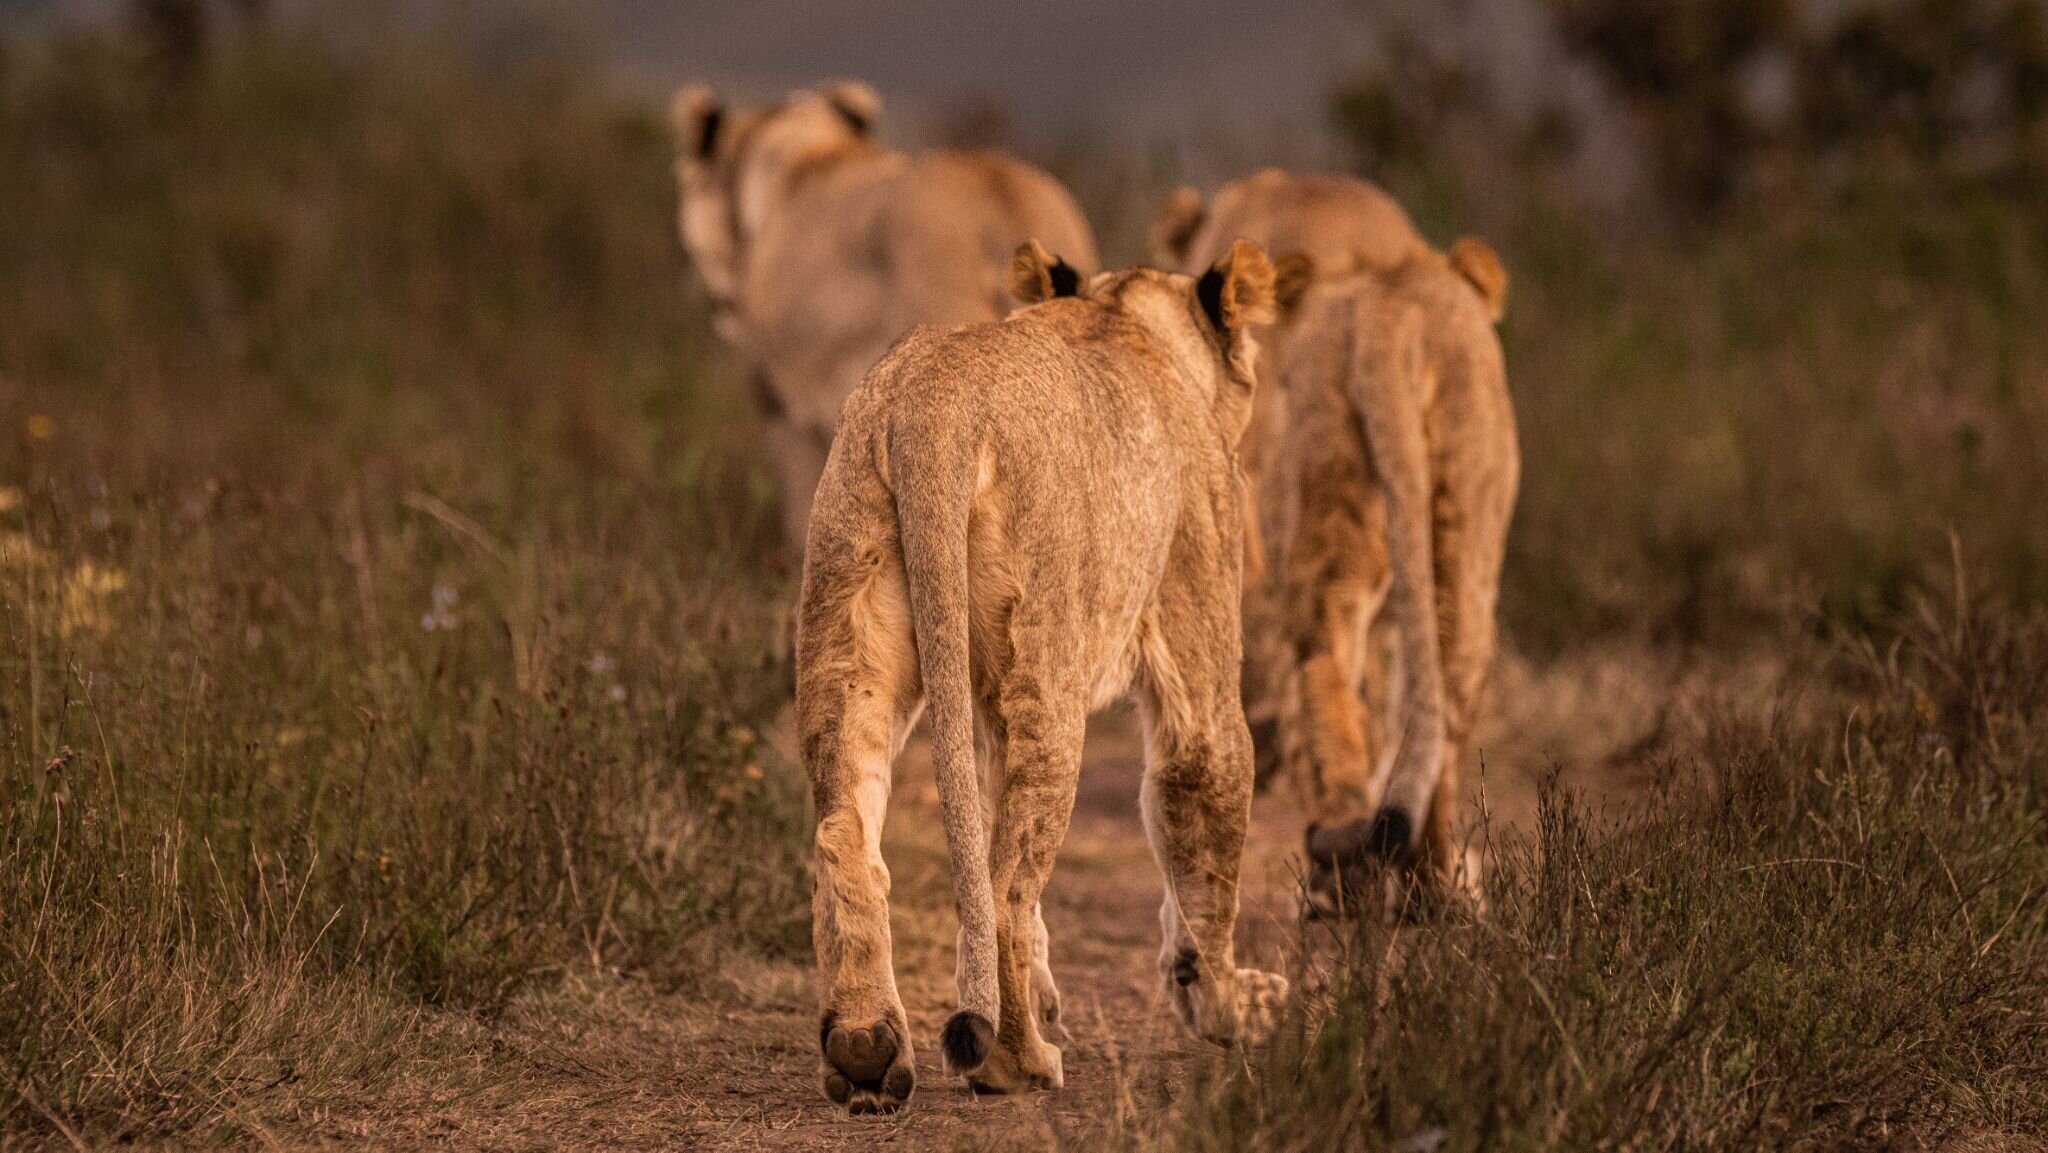 On the Road Again

As time goes by things change for the young lions or lionesses.

Male siblings, as they mature, might form coalitions, uniting to conquer and establish control over territories and prides.
In the case of female siblings, typically,